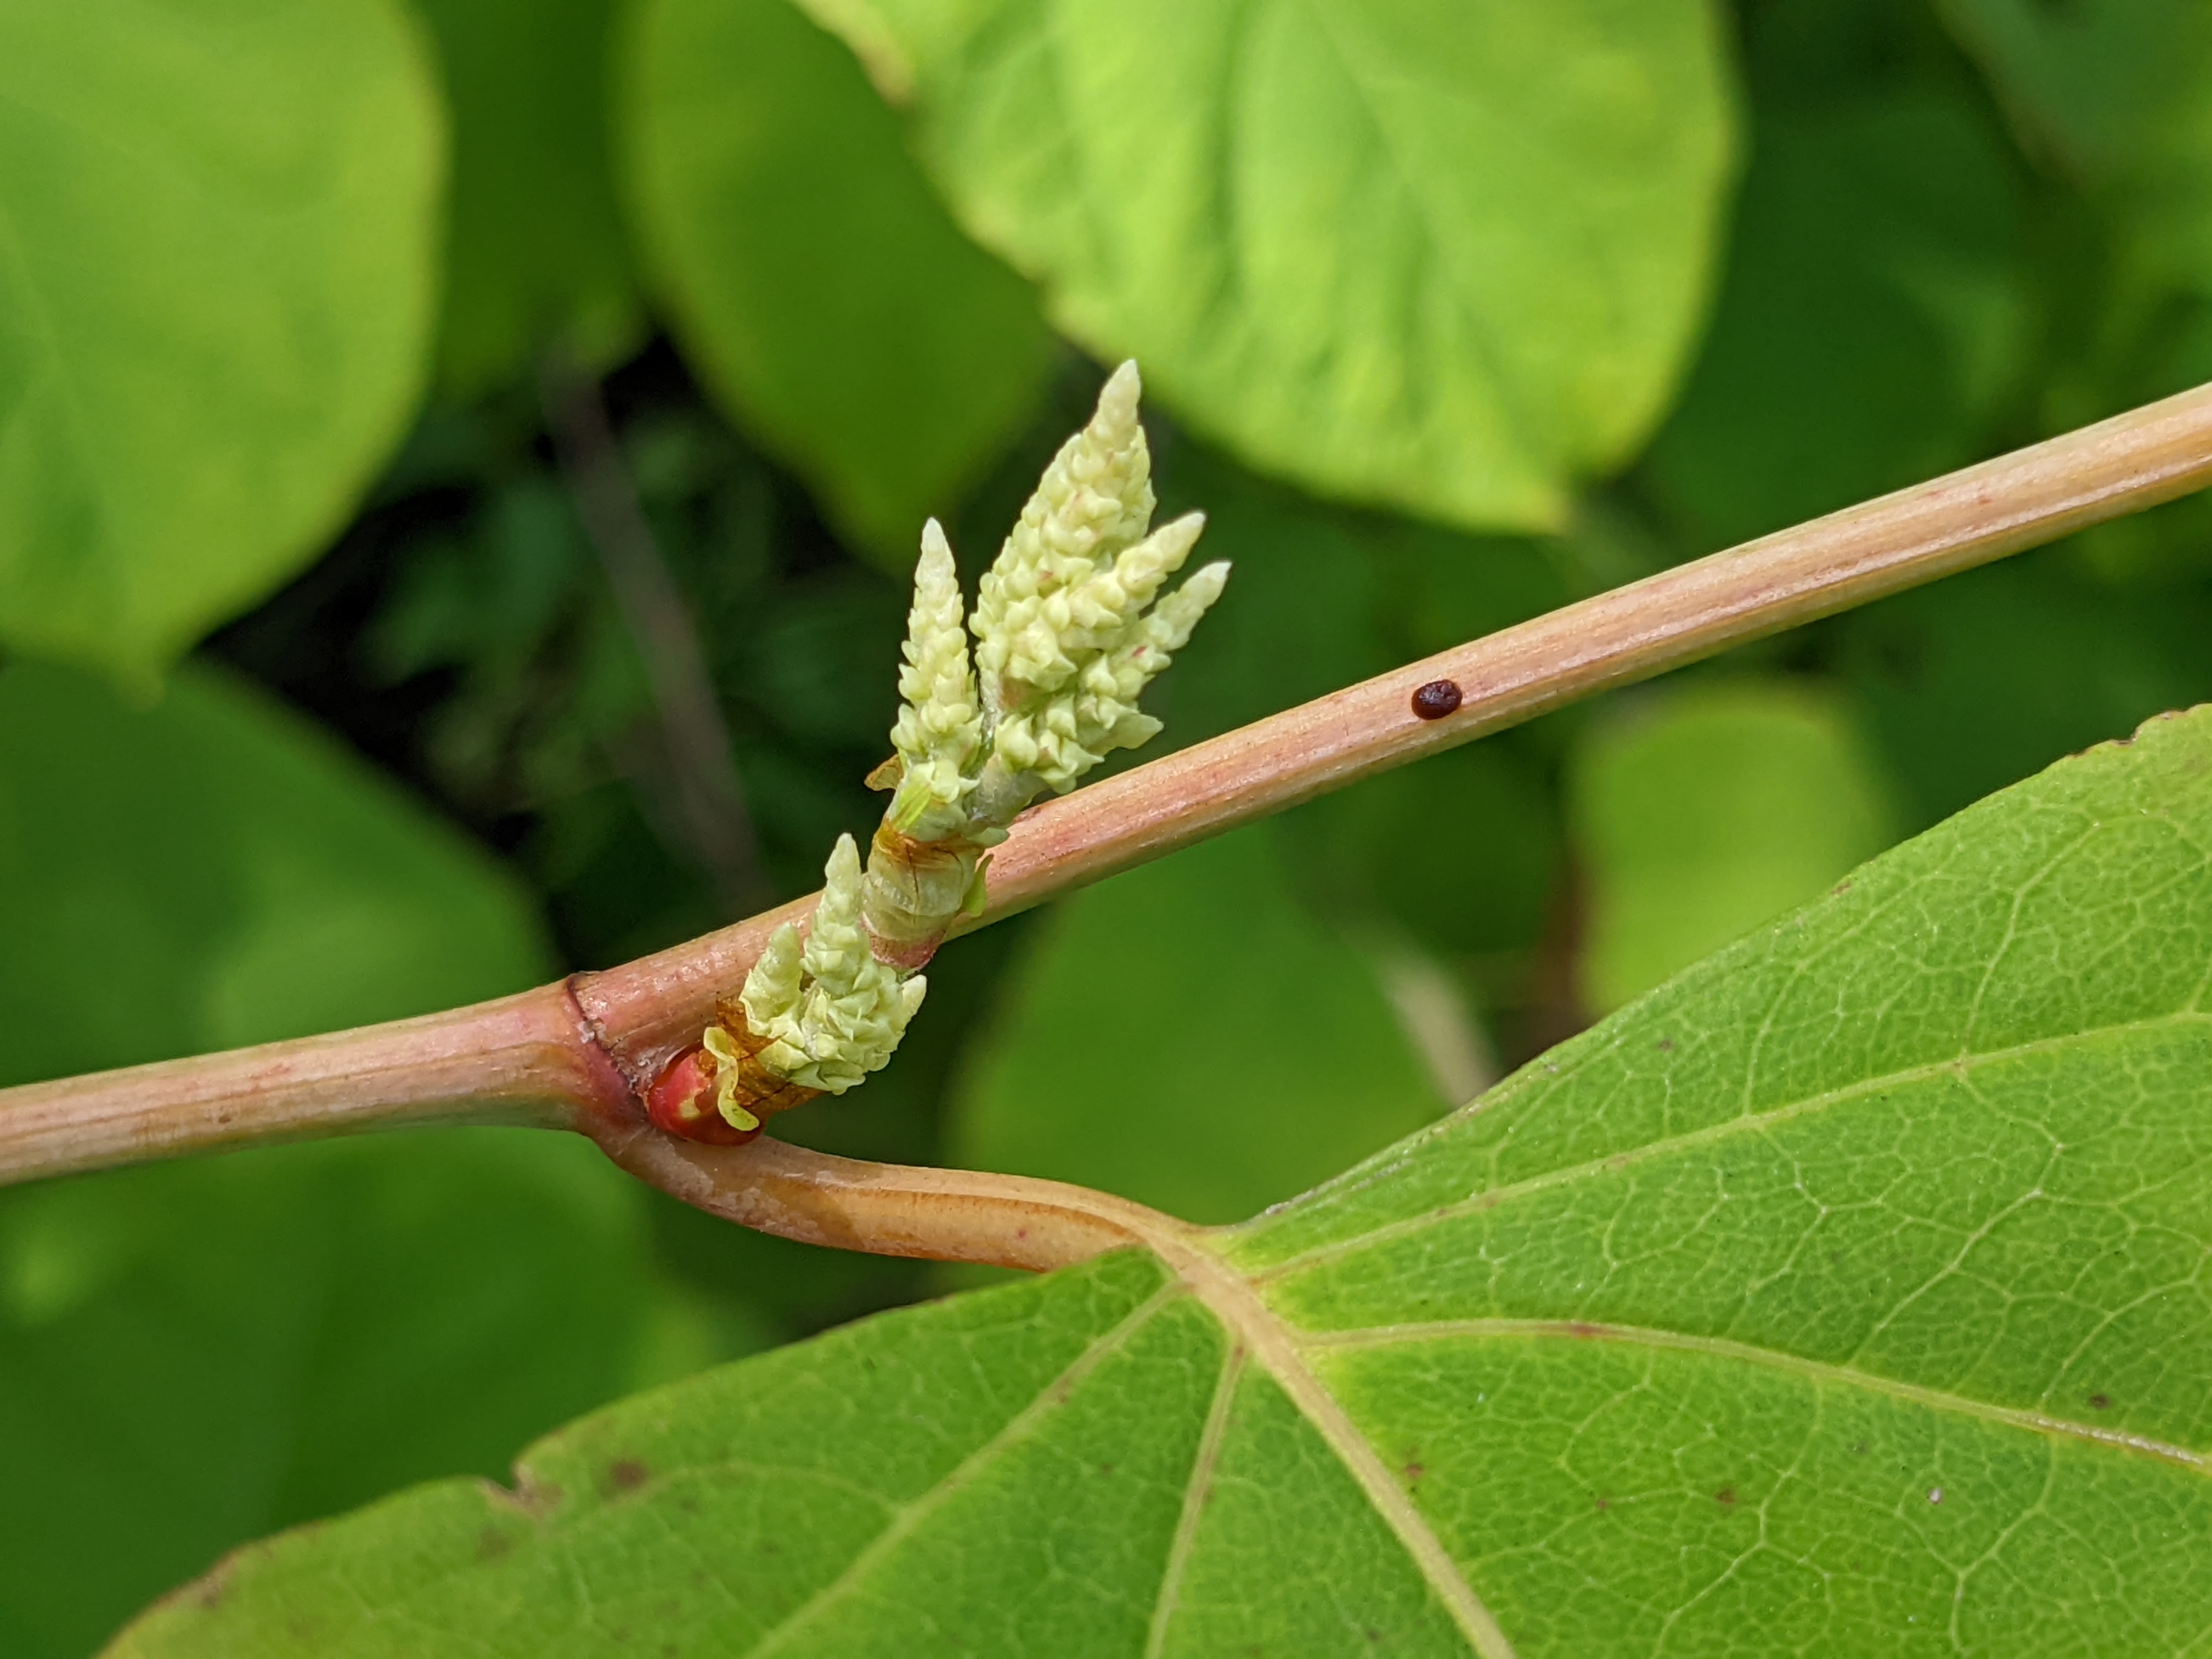 New flower buds on knotweed plant